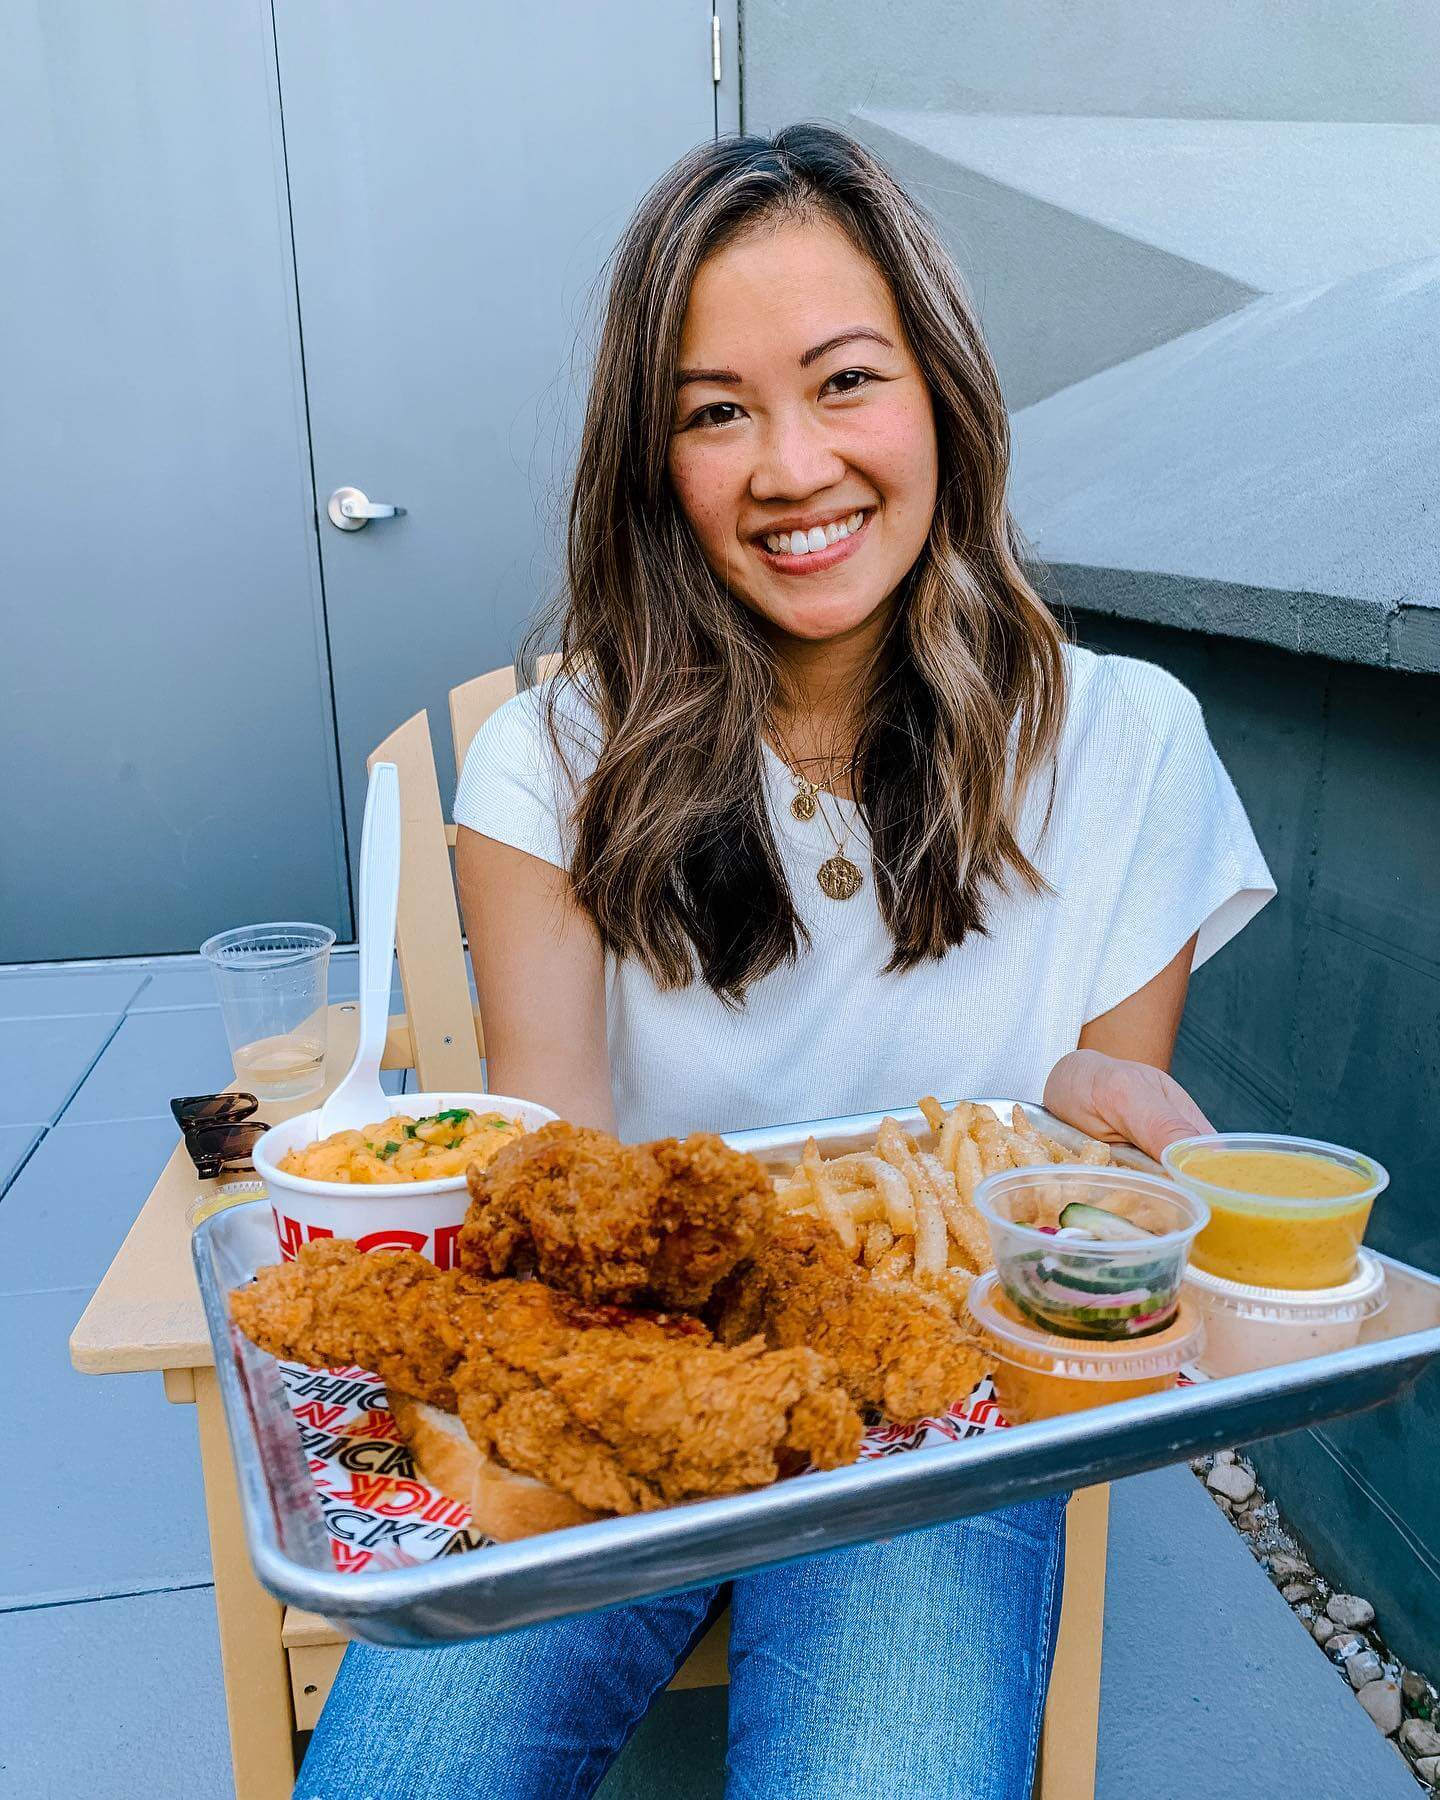 Linh Phillips ’13S (MBA) is in front of a fried chicken meal as she smiles for the camera